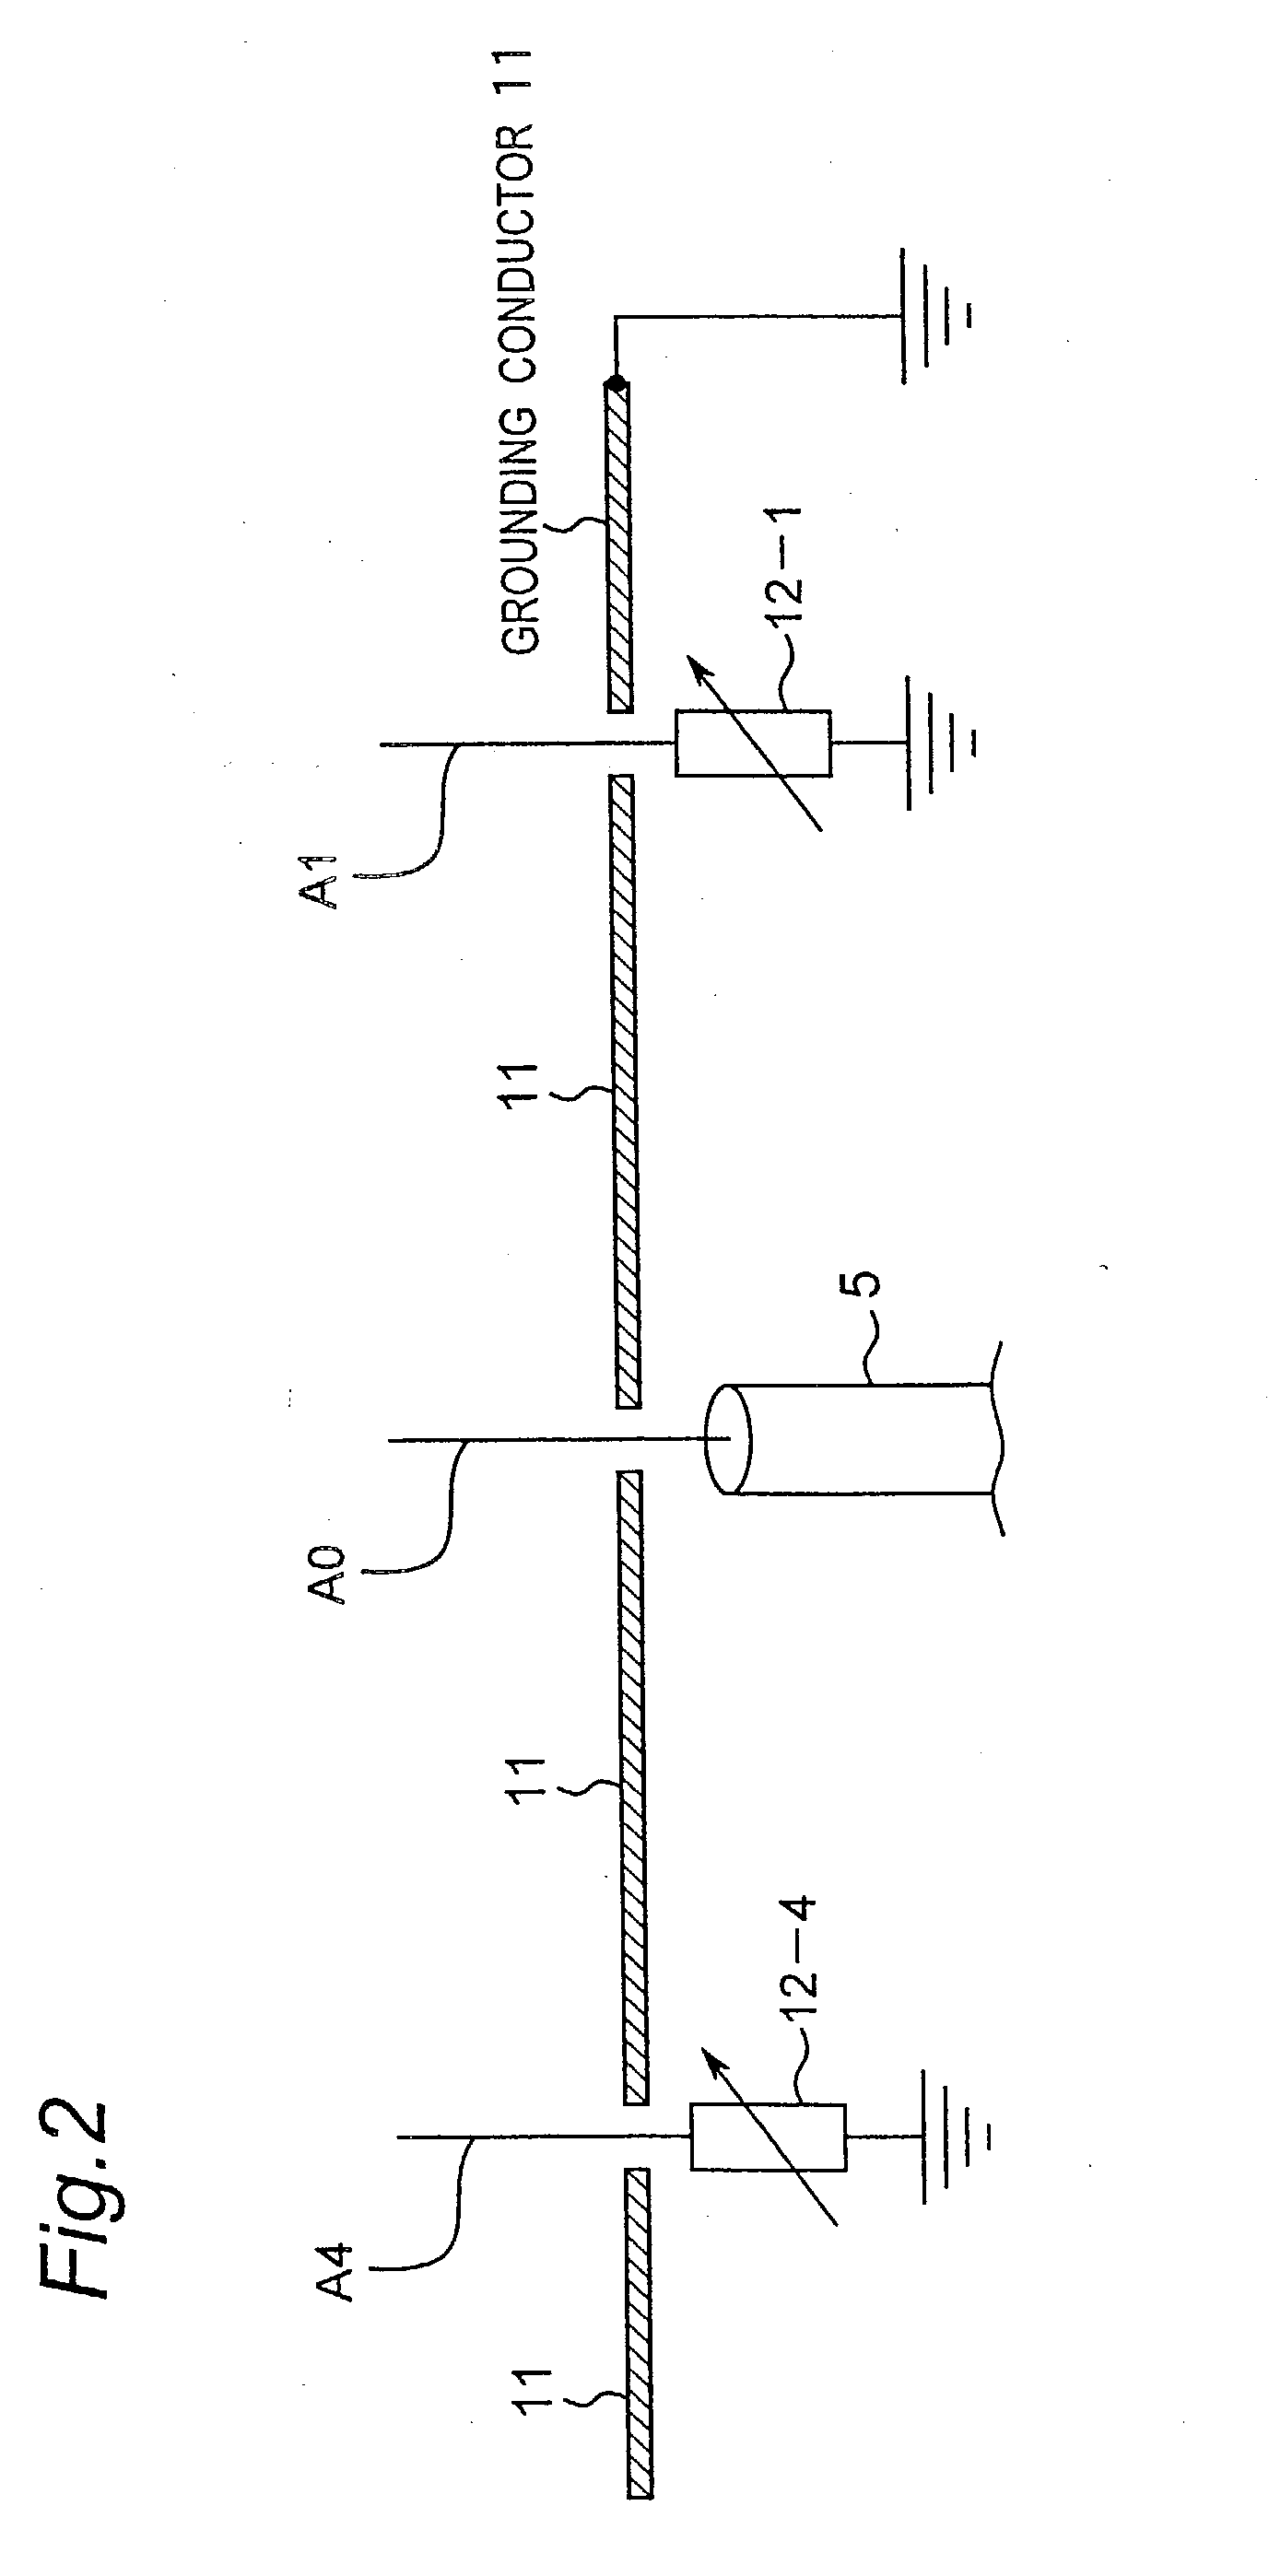 Method for controlling array antenna equipped with single radiating element and a plurality of parasitic elements